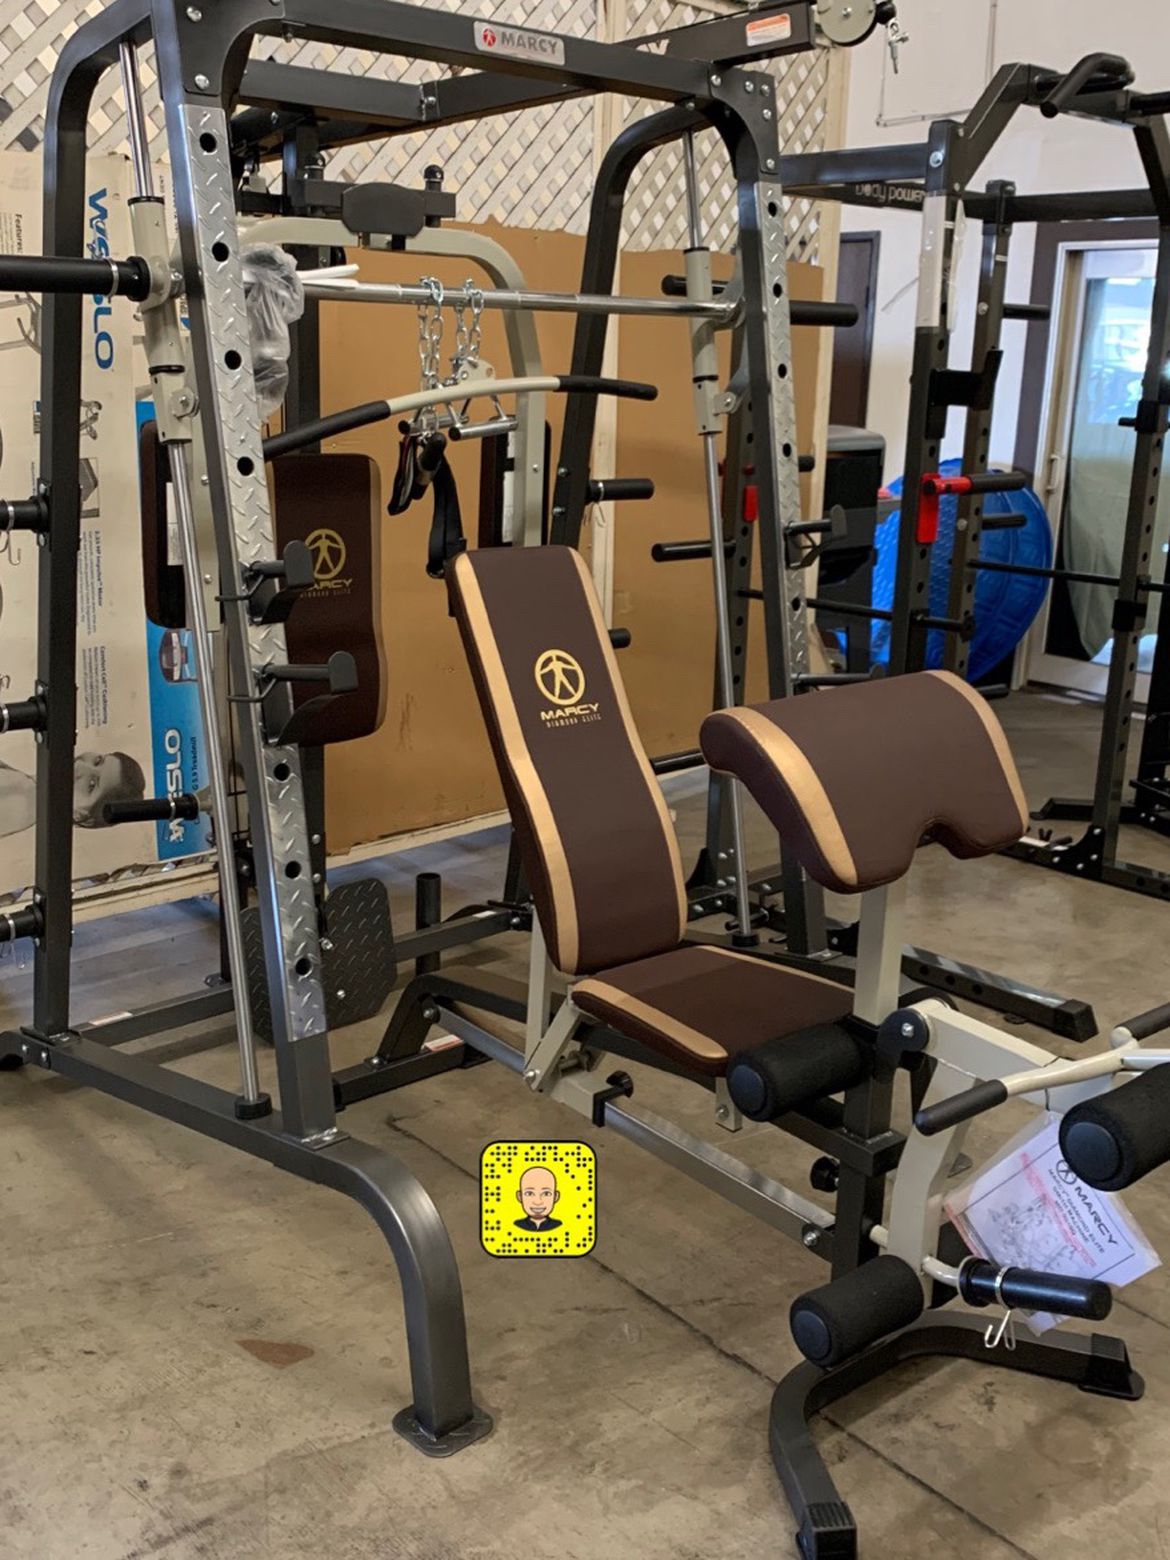 Smith Machine / Home gym price is FIRM